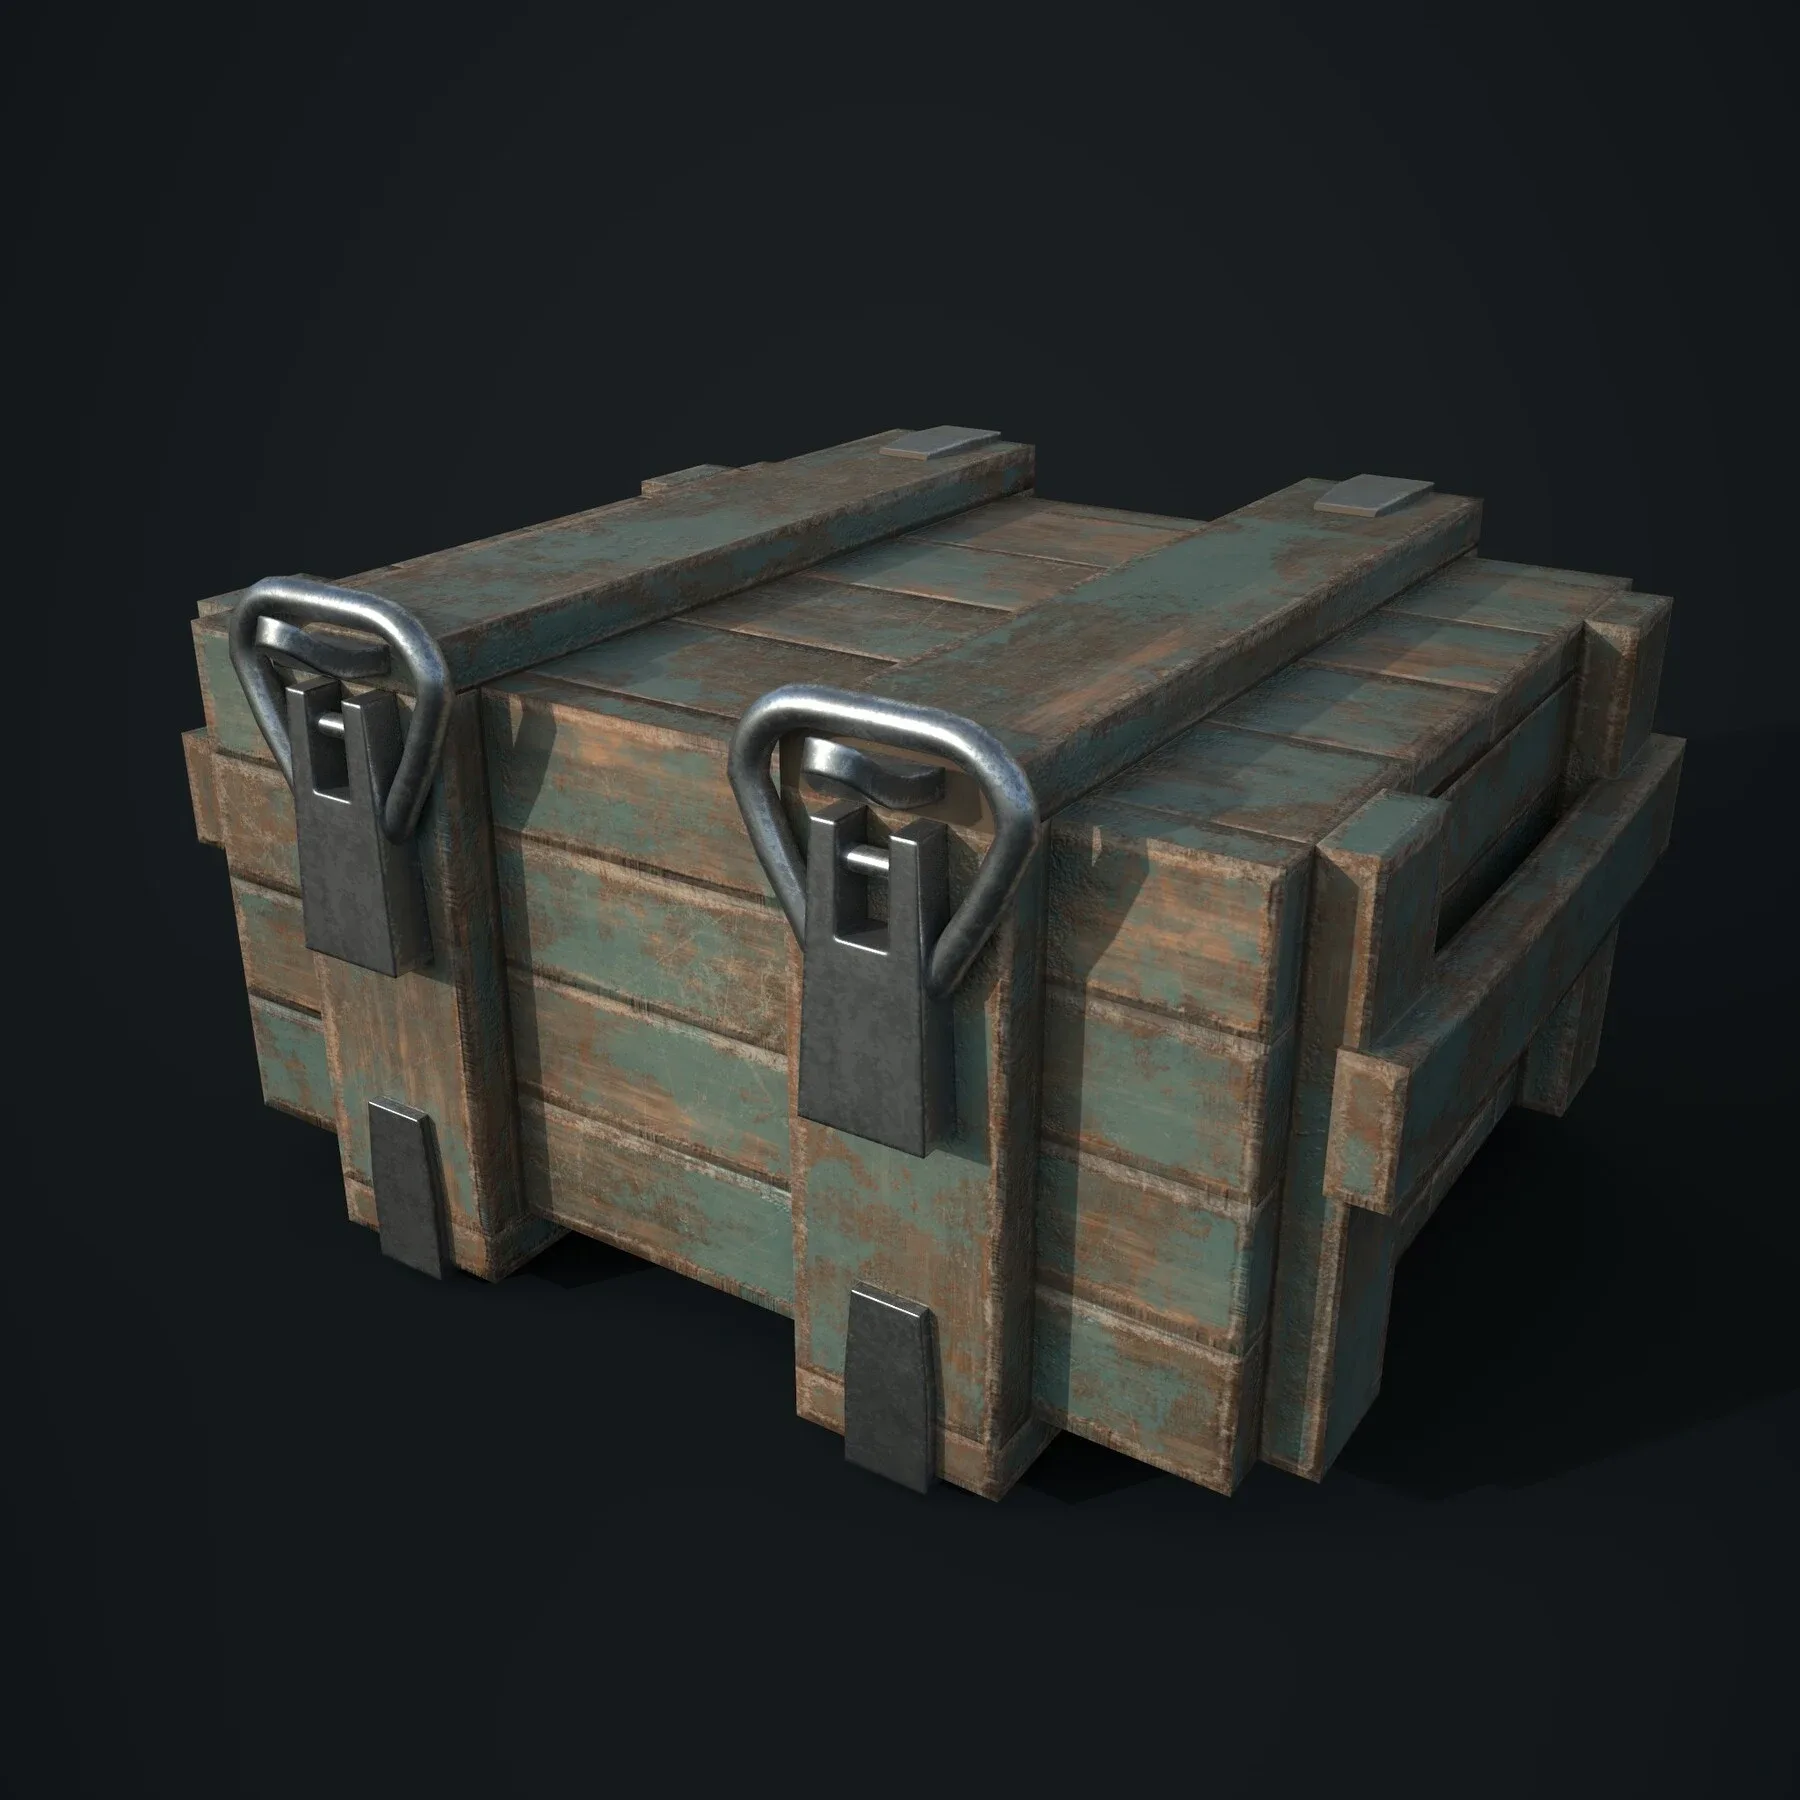 WOODEN ARMY BOX TEXTURING TUTORIAL